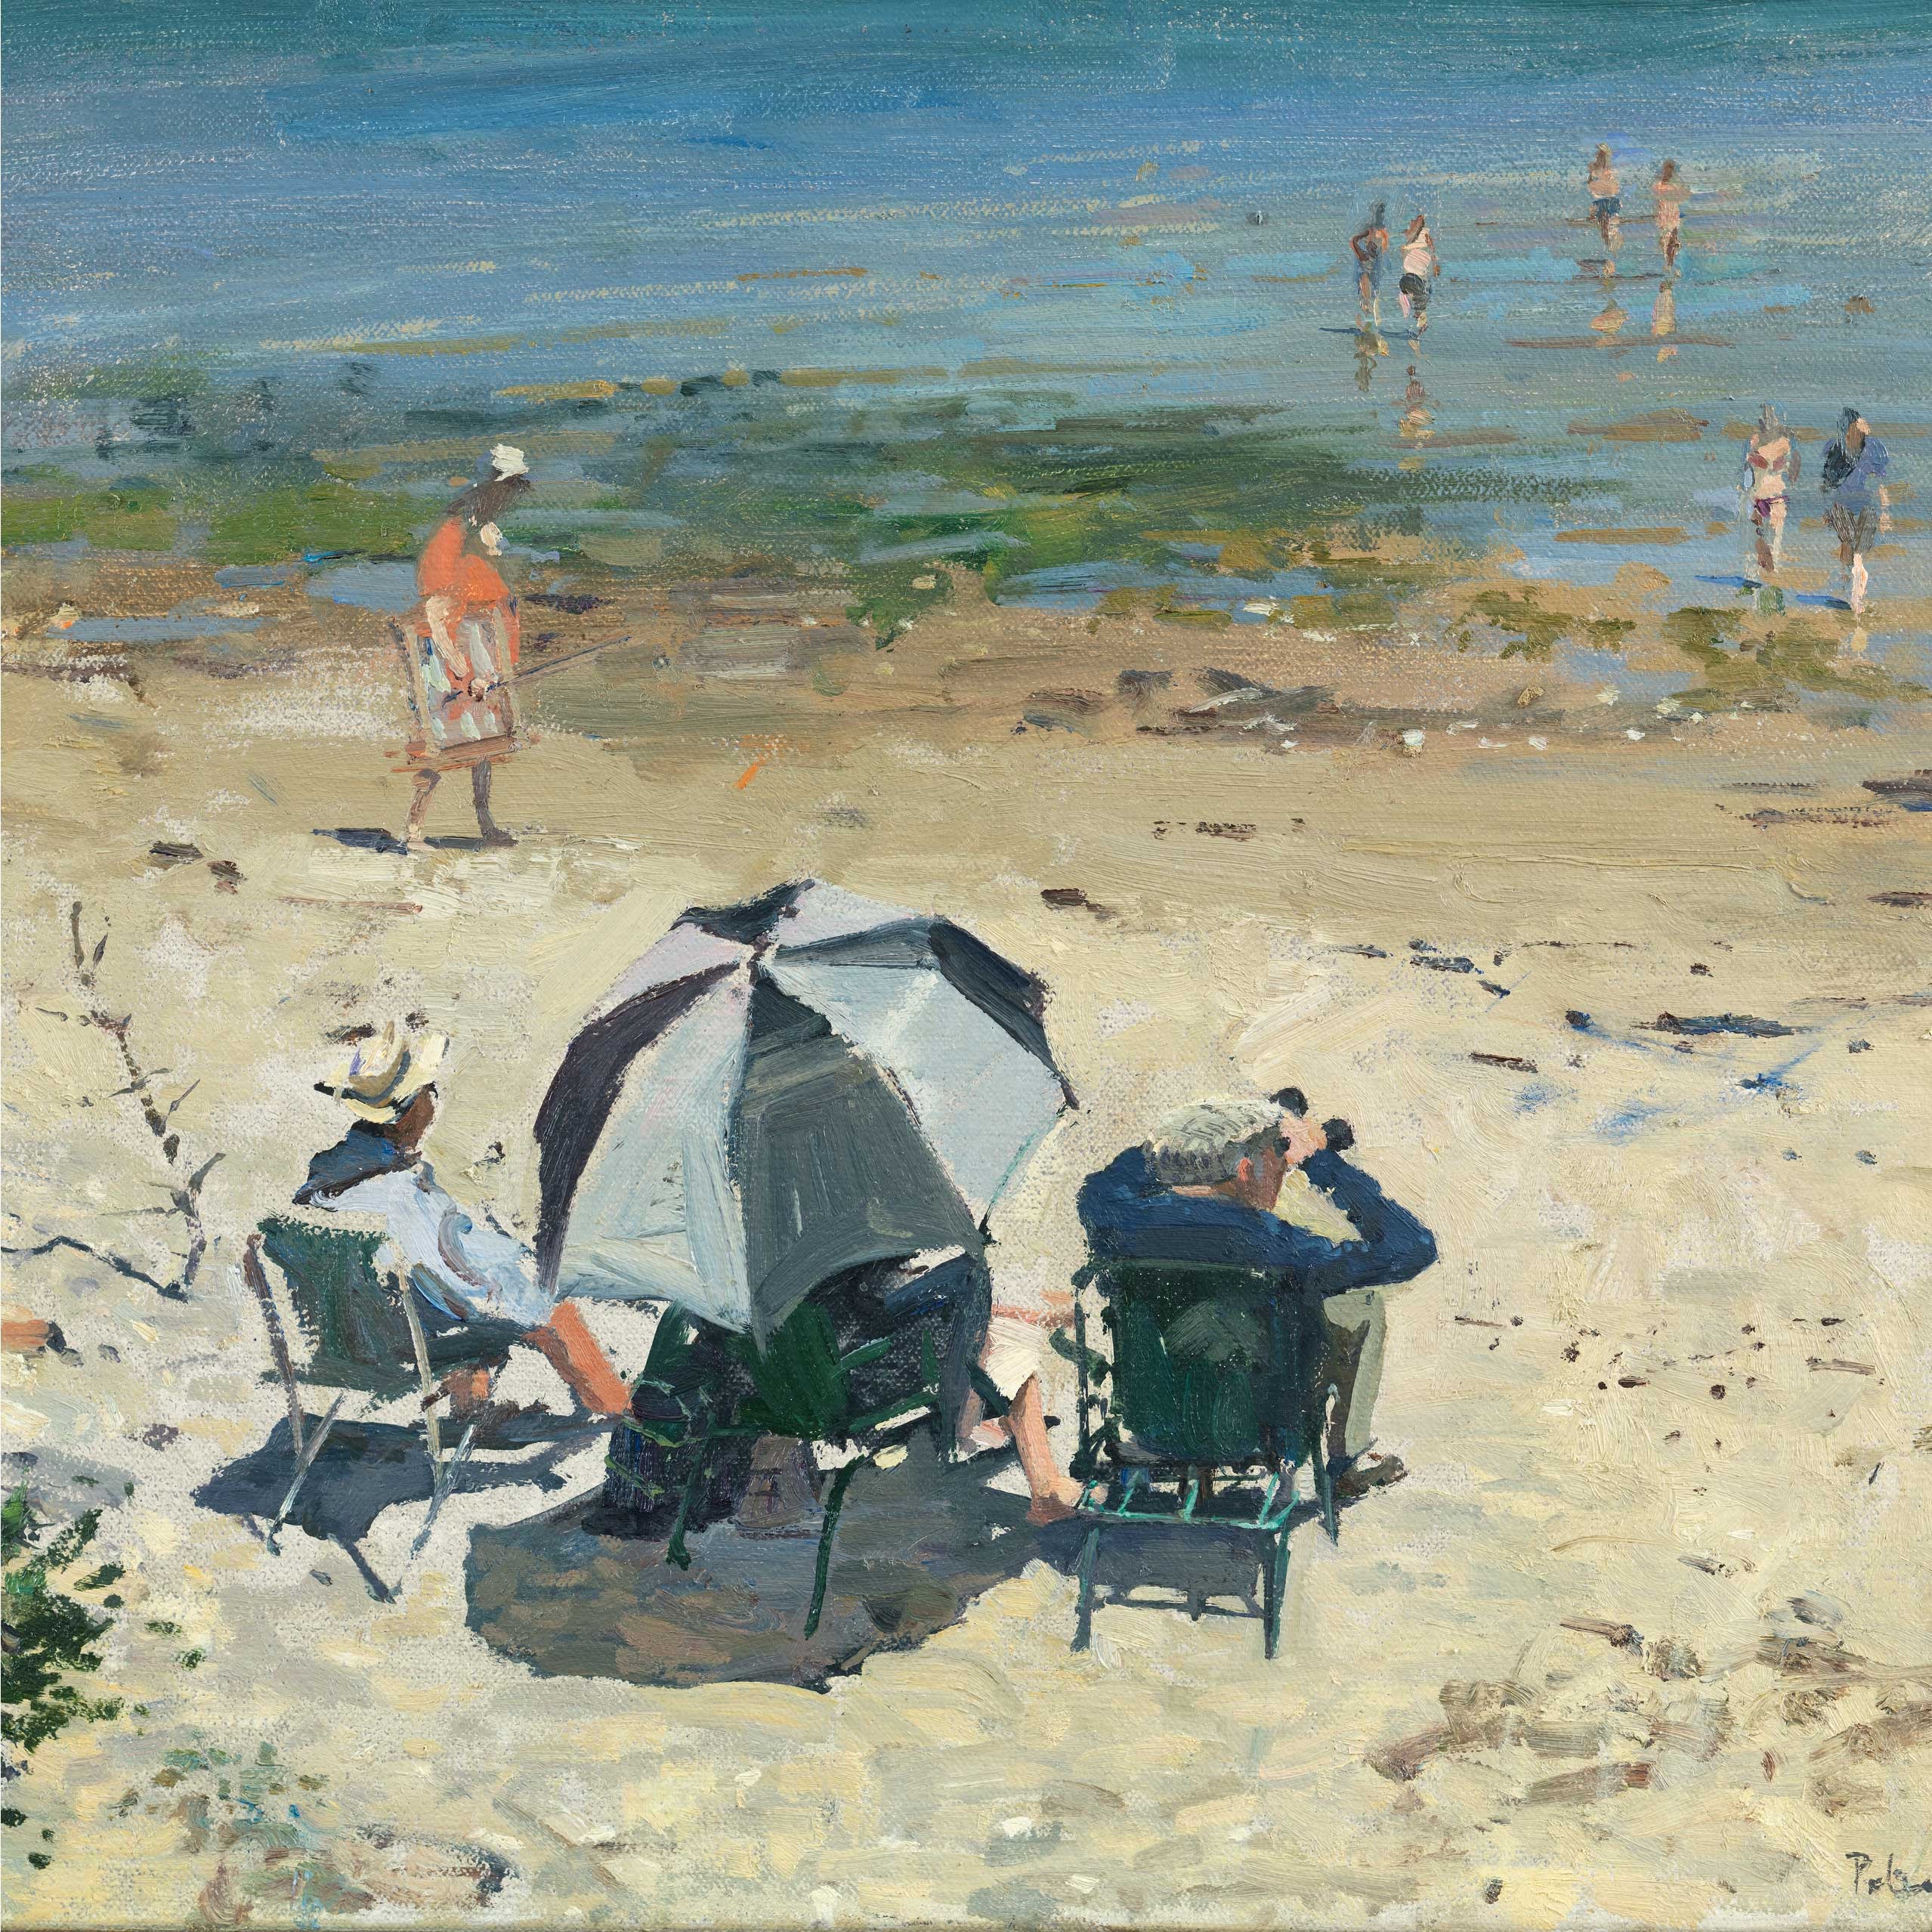 Afternoon on the Beach by Peter Brown, Fine Art Greeting Card, NEAC range, Beach scene